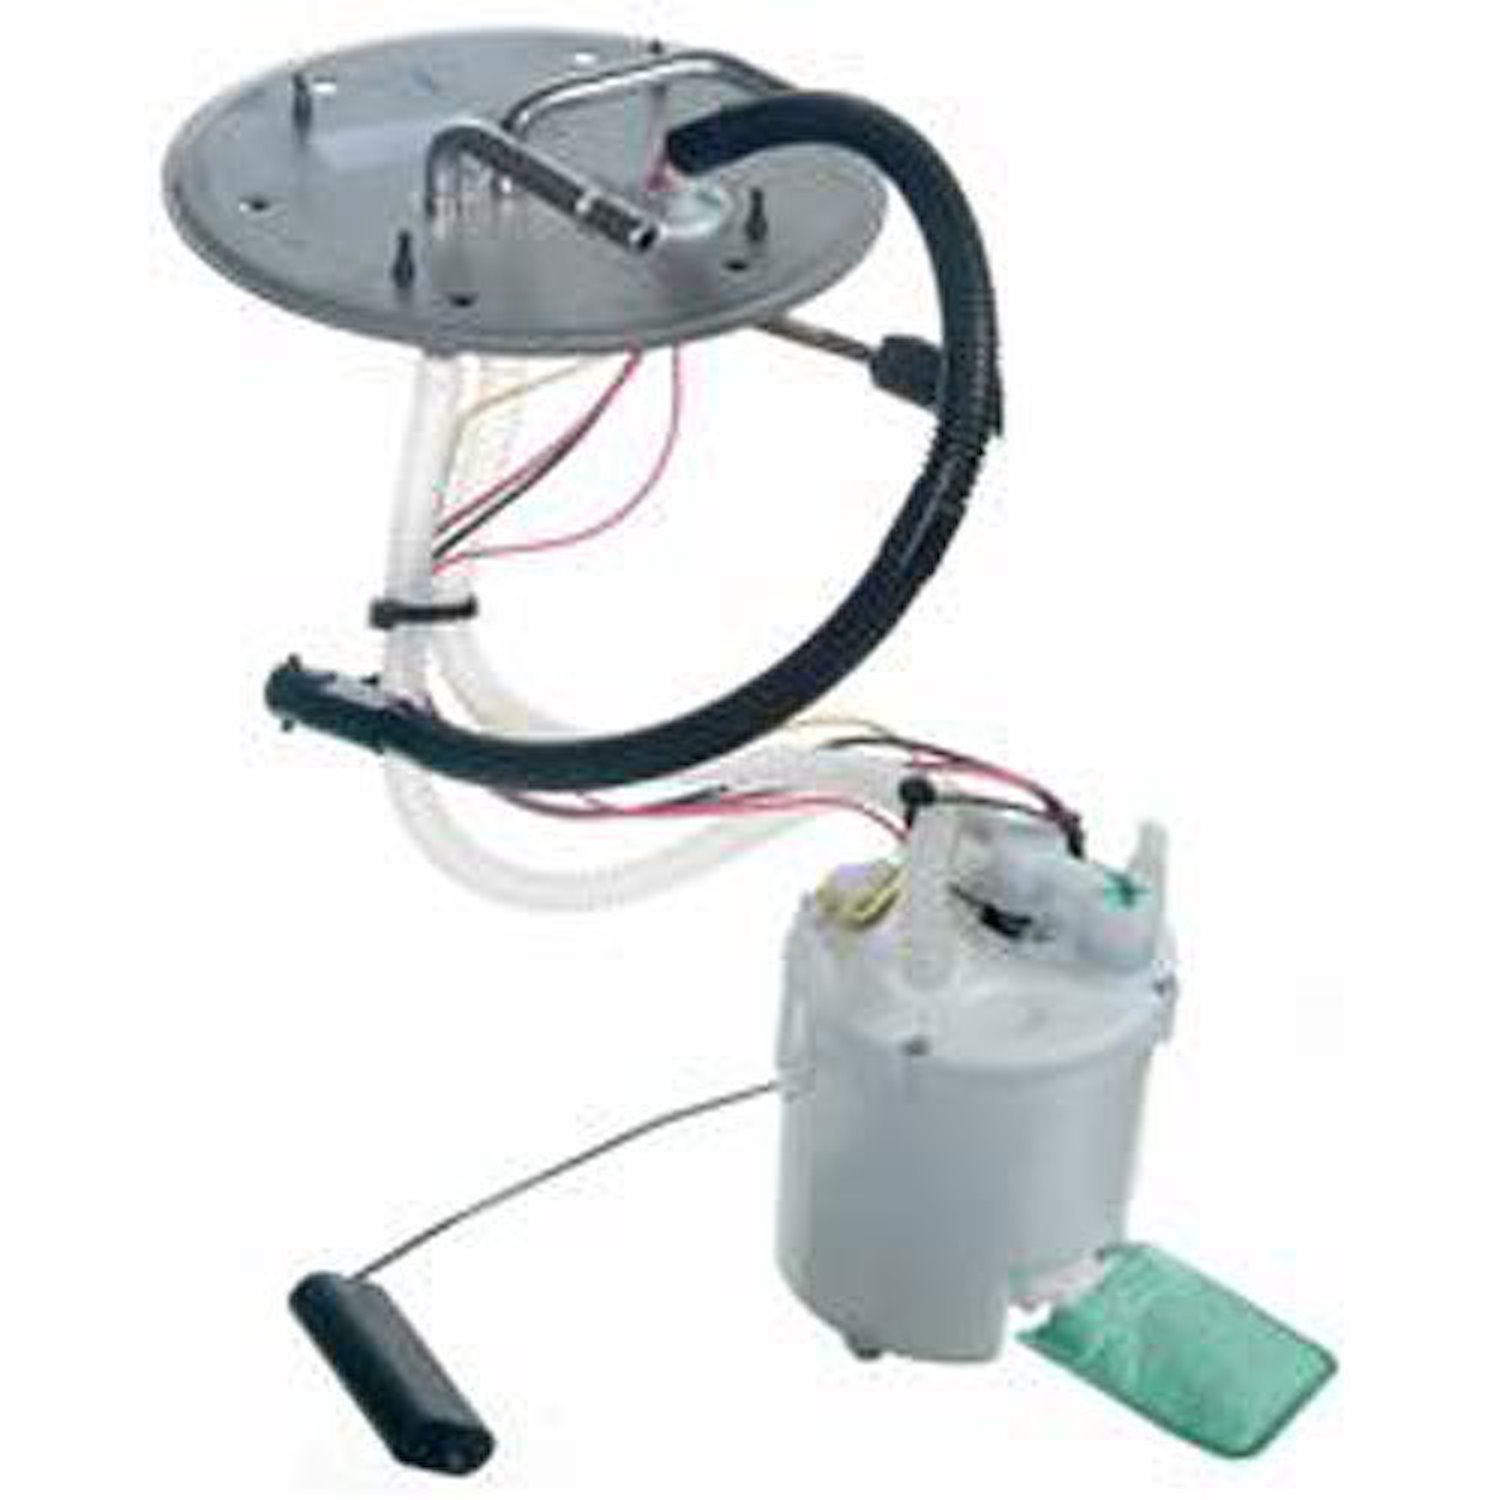 OE Ford Replacement Electric Fuel Pump Module Assembly 1999-04 Ford F250/F350 Super Duty 5.4L/6.8L V8